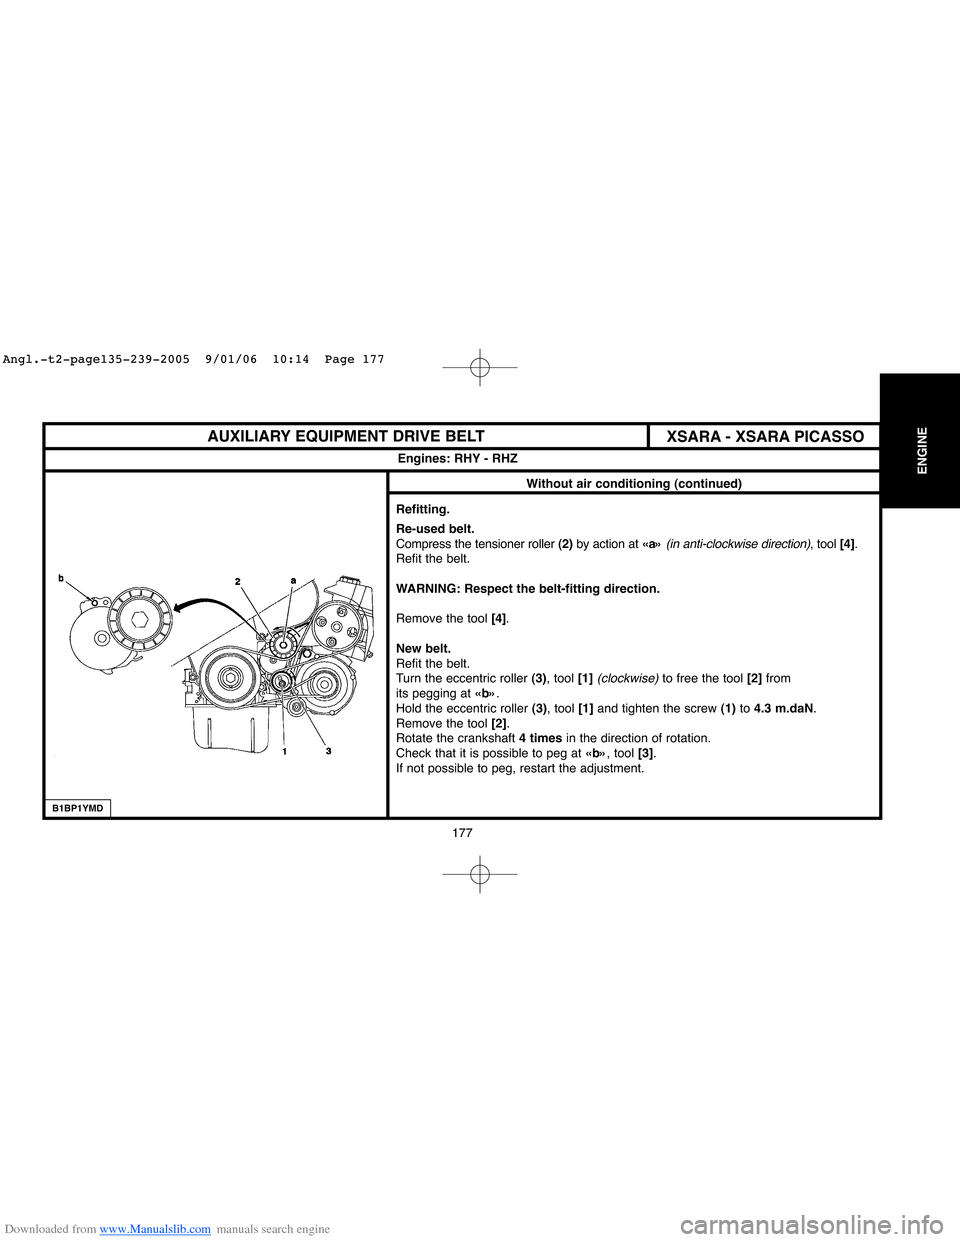 Citroen C4 2005 2.G Workshop Manual Downloaded from www.Manualslib.com manuals search engine 177
ENGINE
XSARA - XSARA PICASSO AUXILIARY EQUIPMENT DRIVE BELT
Engines: RHY - RHZ
Without air conditioning (continued)
Refitting.
Re-used belt